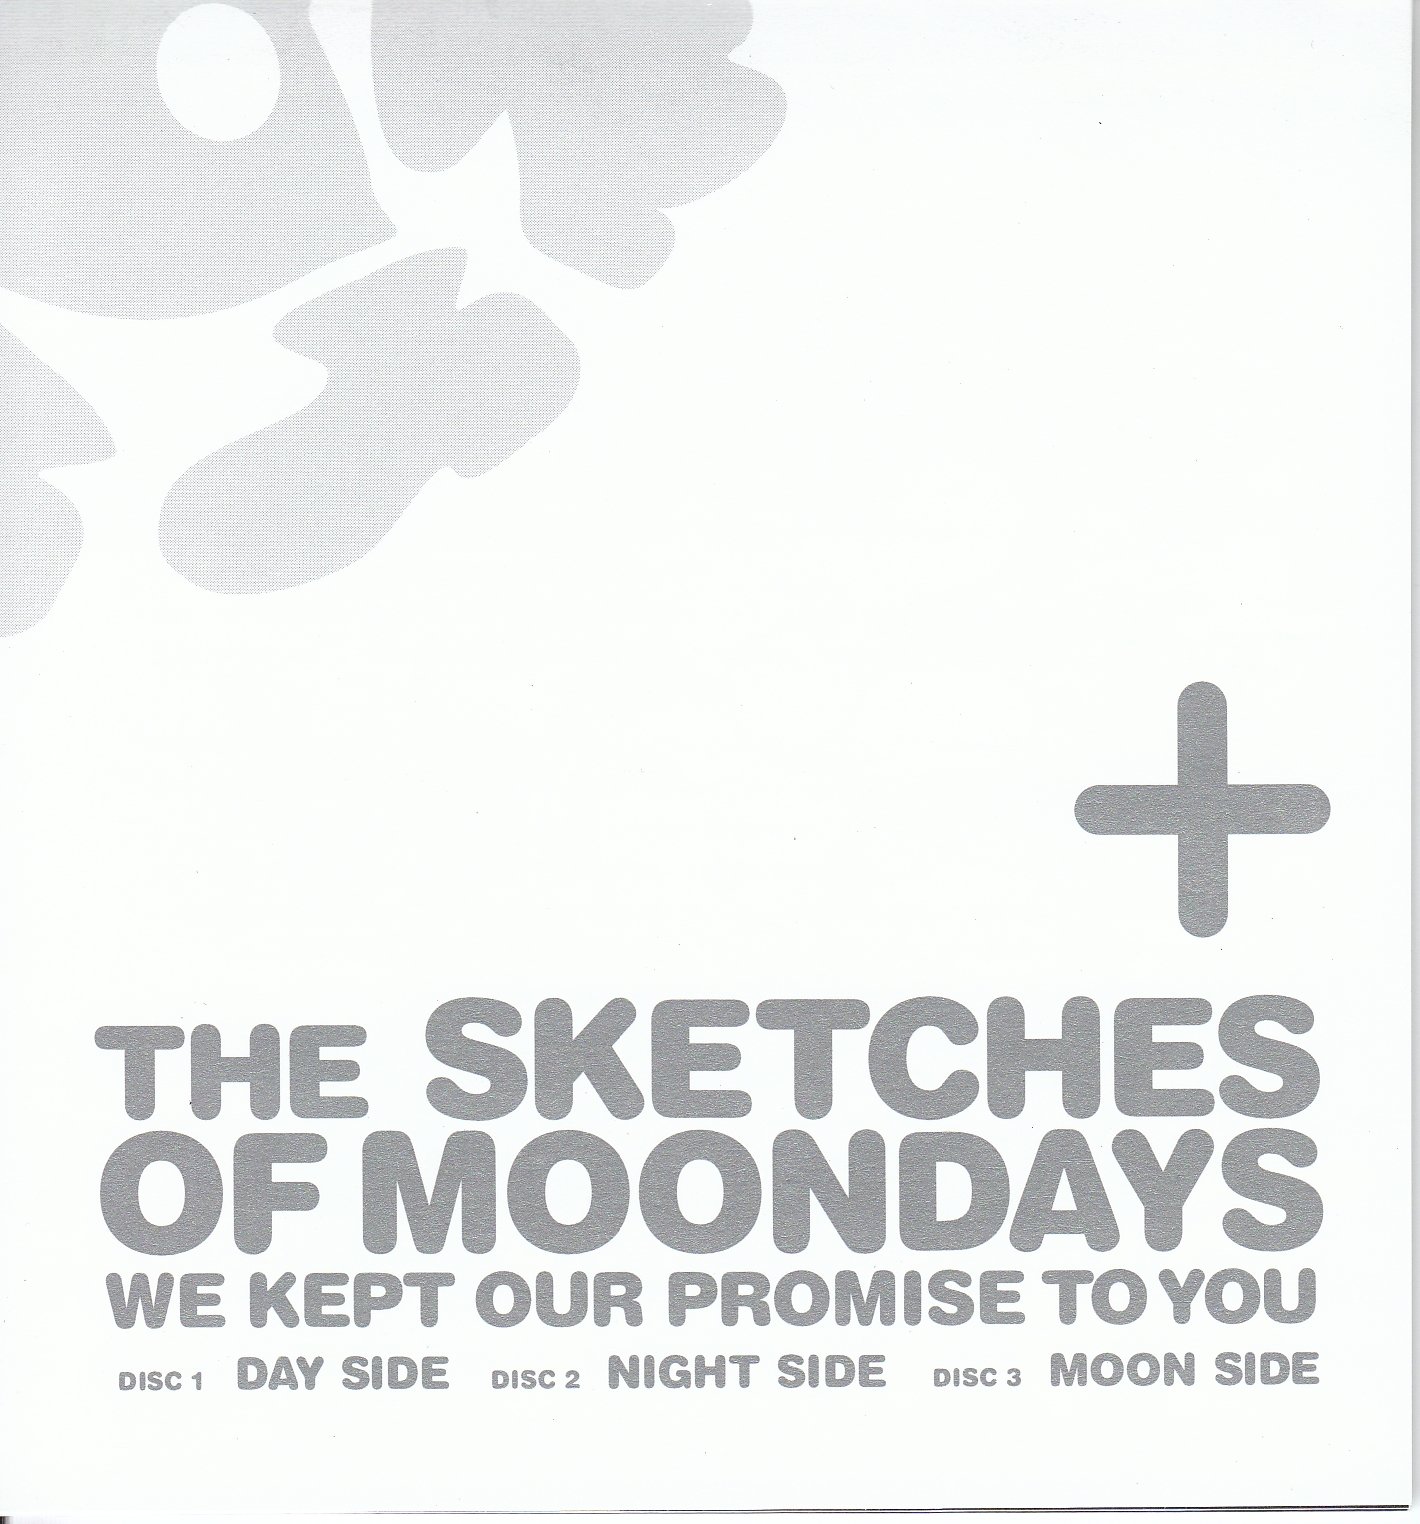 Day side. Our Promise группа. I Promise you the Moon. Moon Days (@Moondays). Our Promise to you.